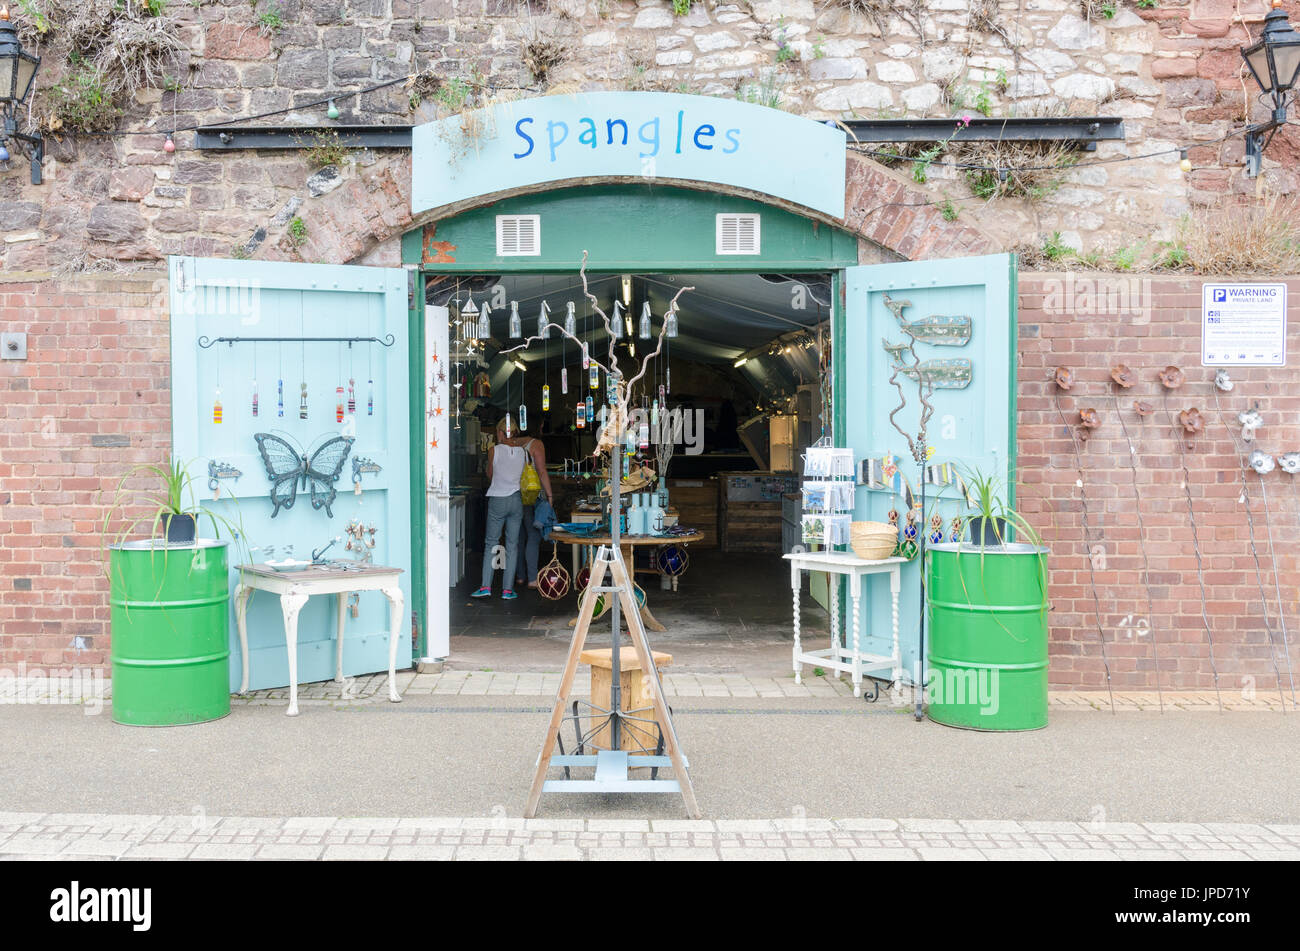 Shop in the cellars on The Quay on the bank of the River Exe in Exeter, Devon Stock Photo